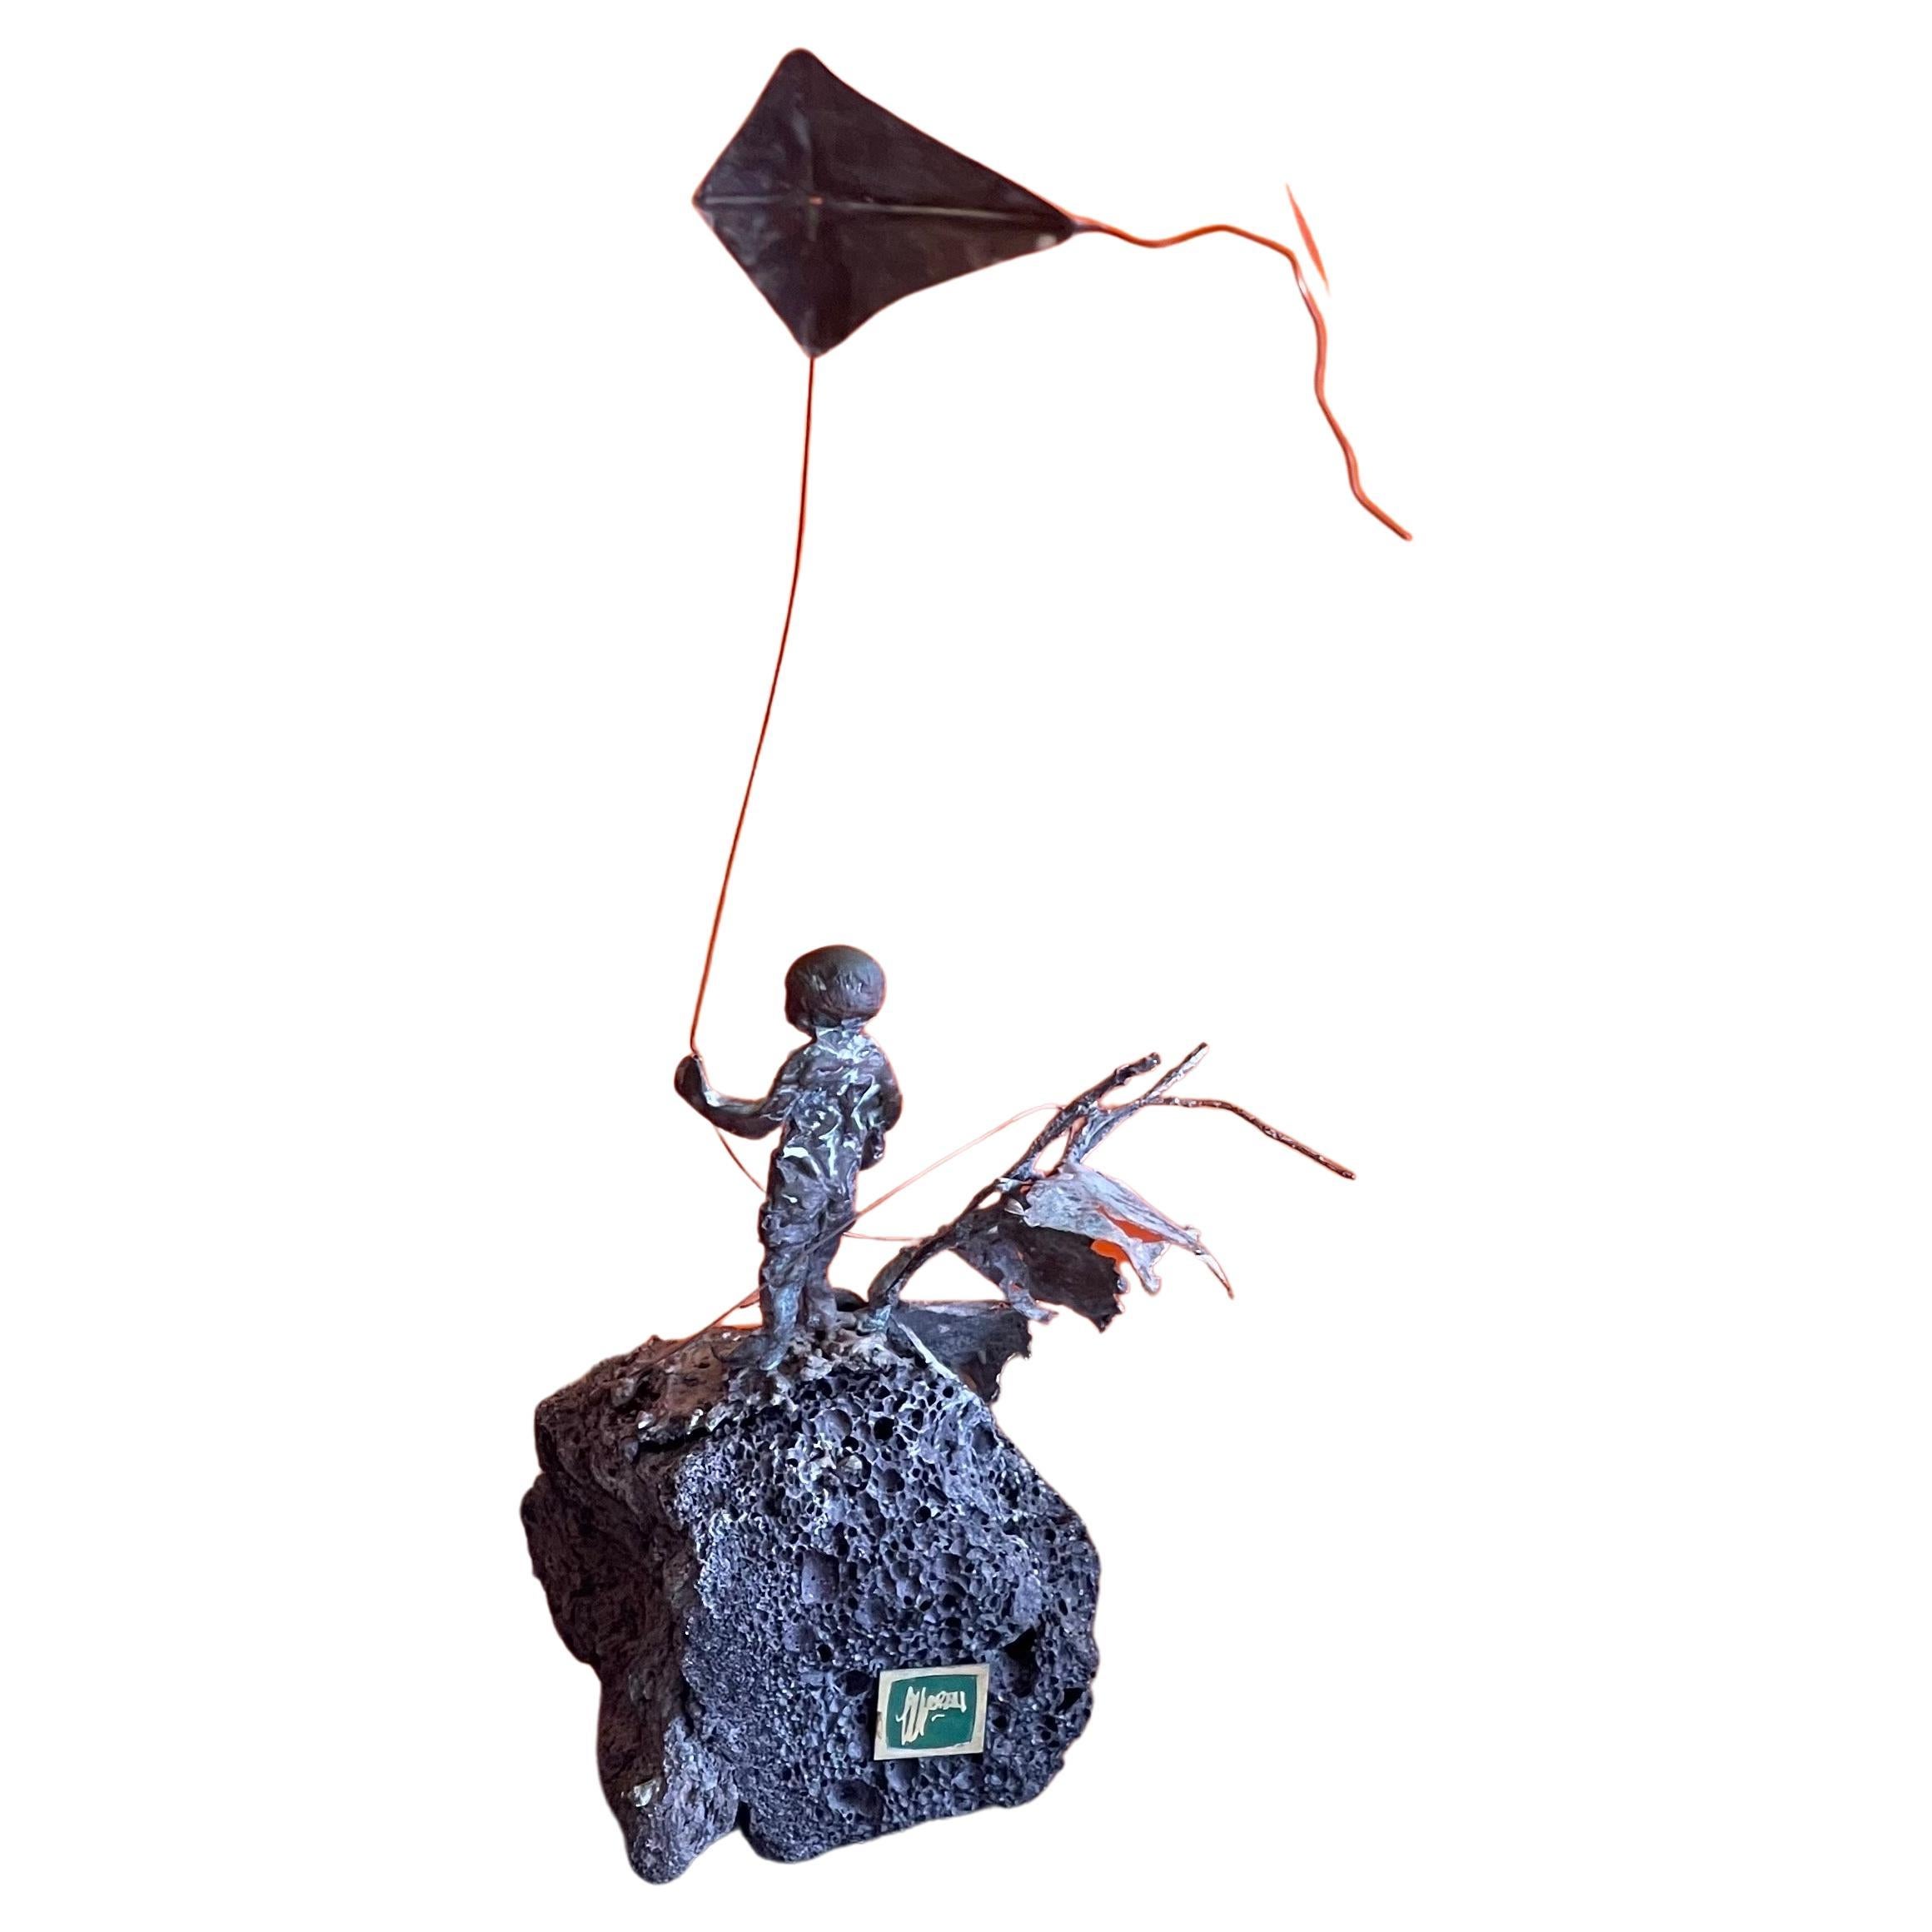 A really cool child flying kite bronze on volcanic rock sculpture by Malcolm Moran, circa 1970s. The piece is in very good vintage condition and measures 10